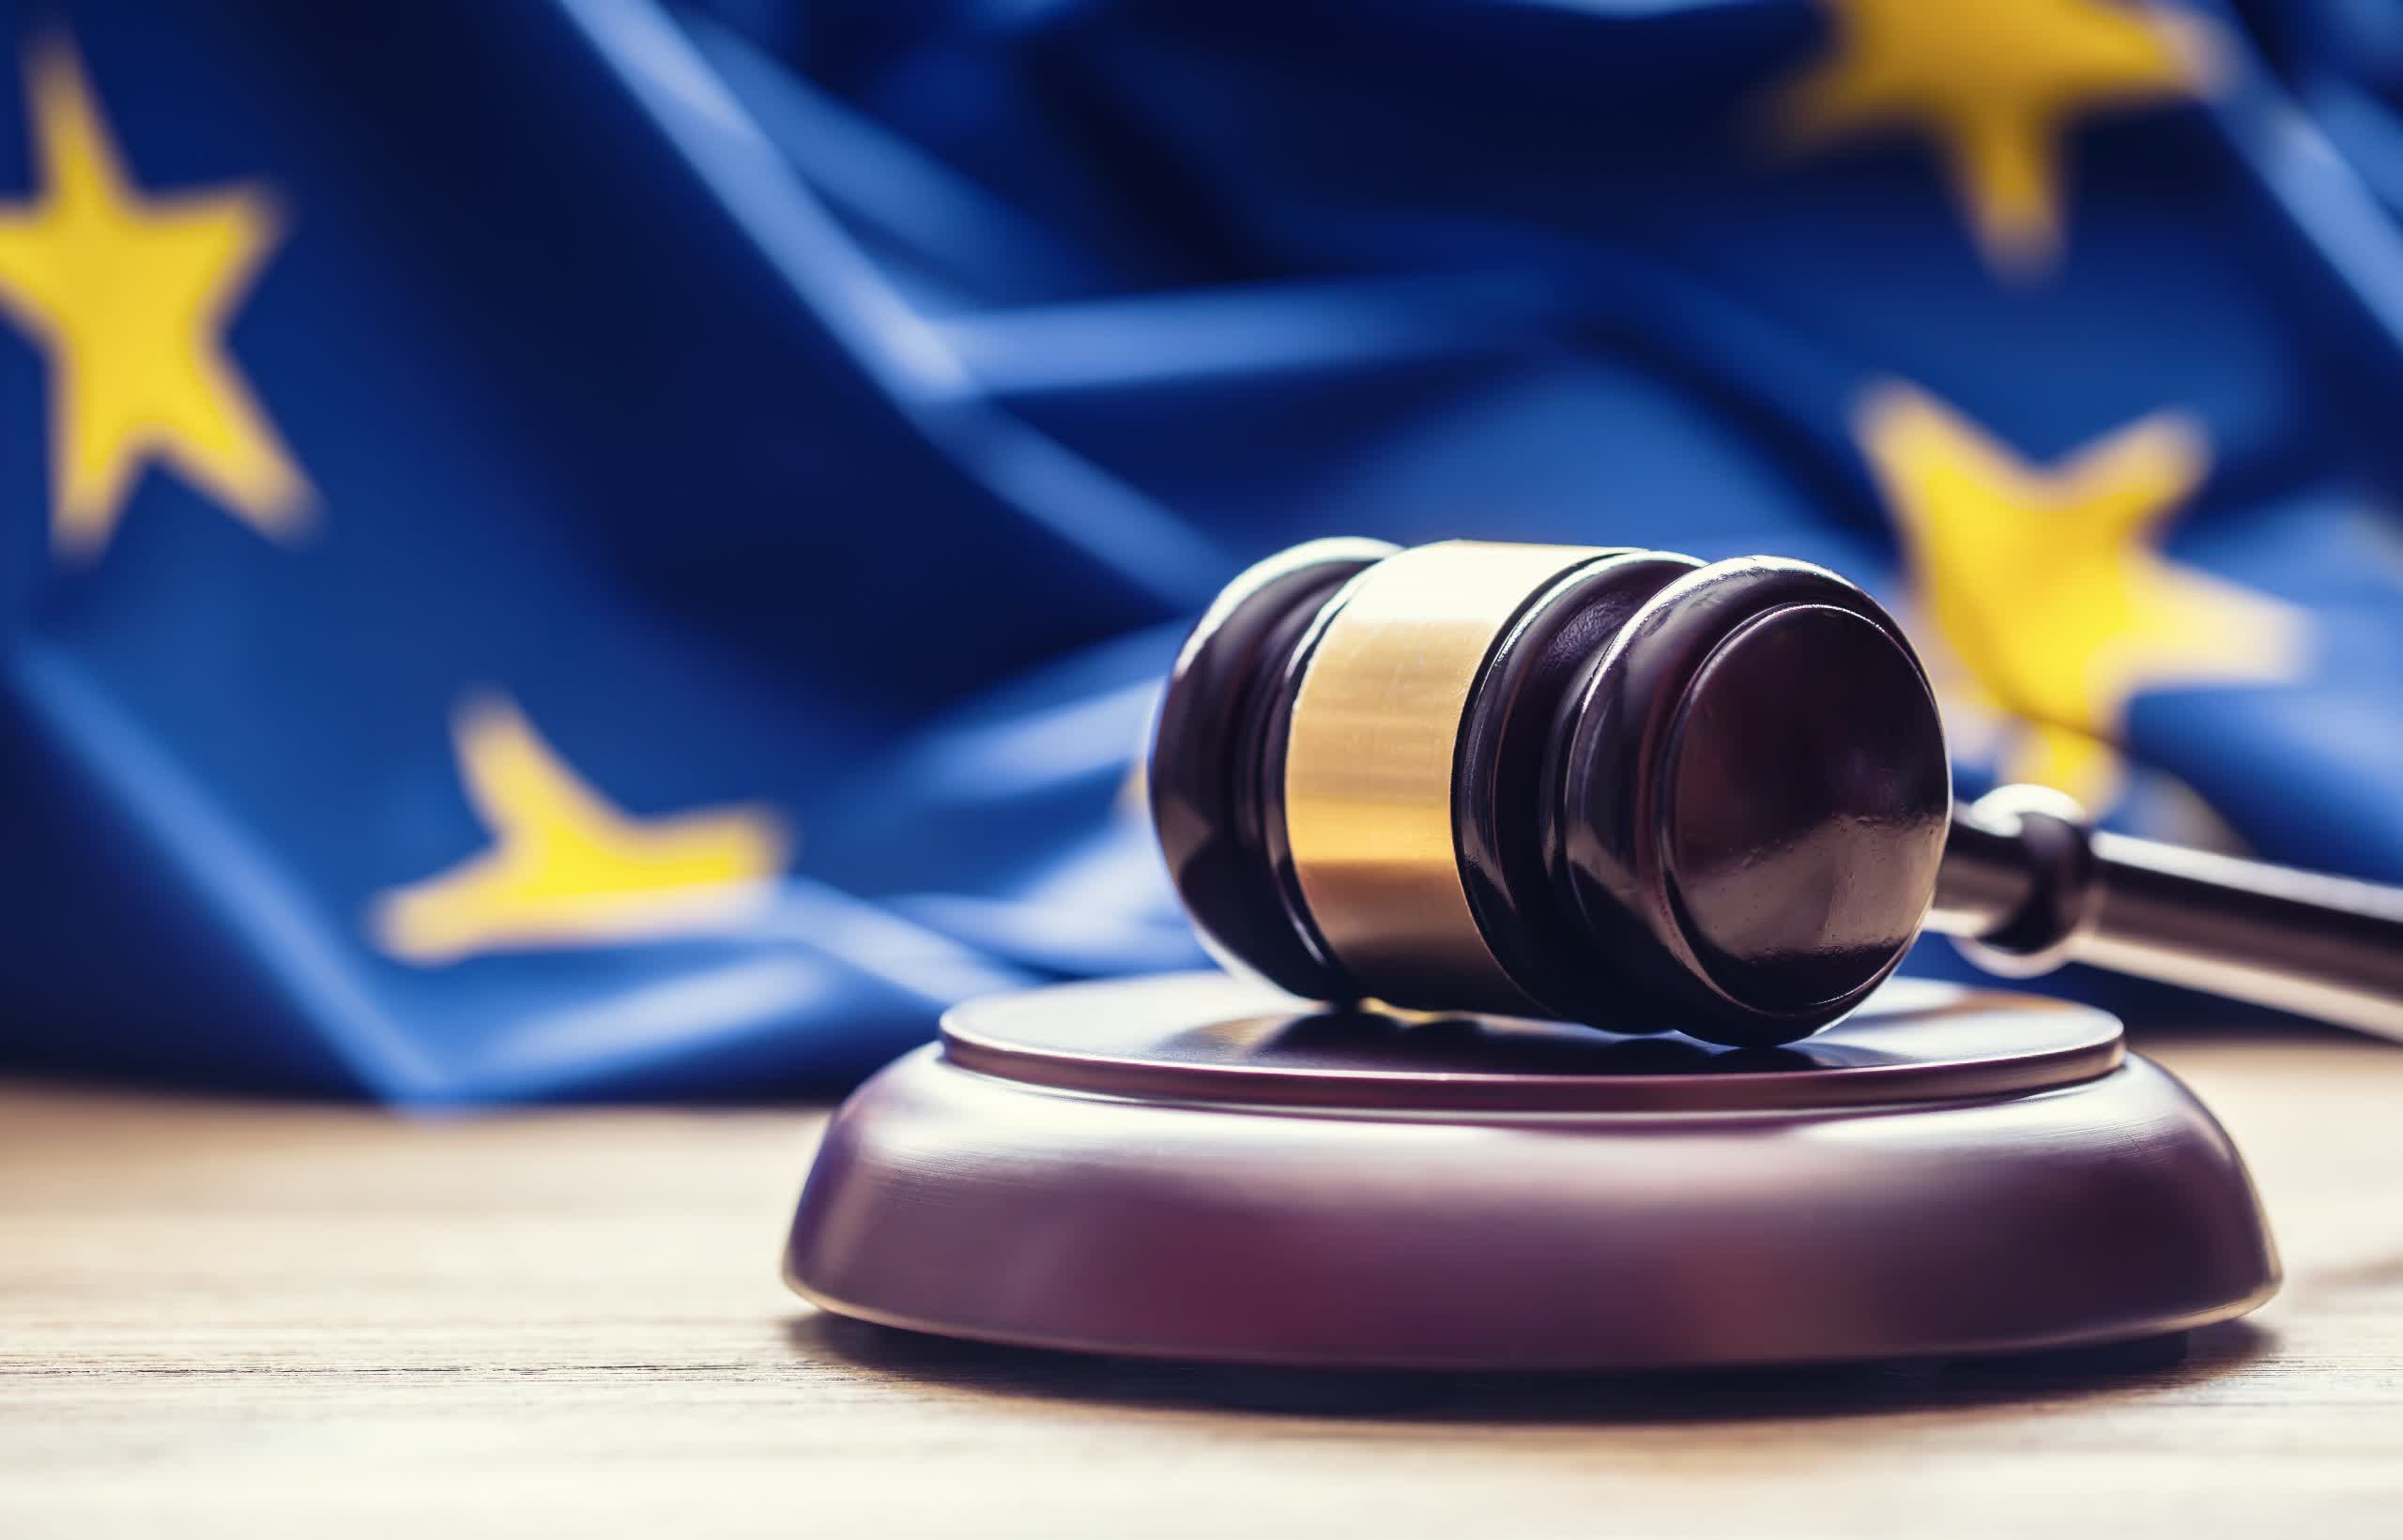 Europe is investigating Microsoft for antitrust law breach with Teams & Office bundle